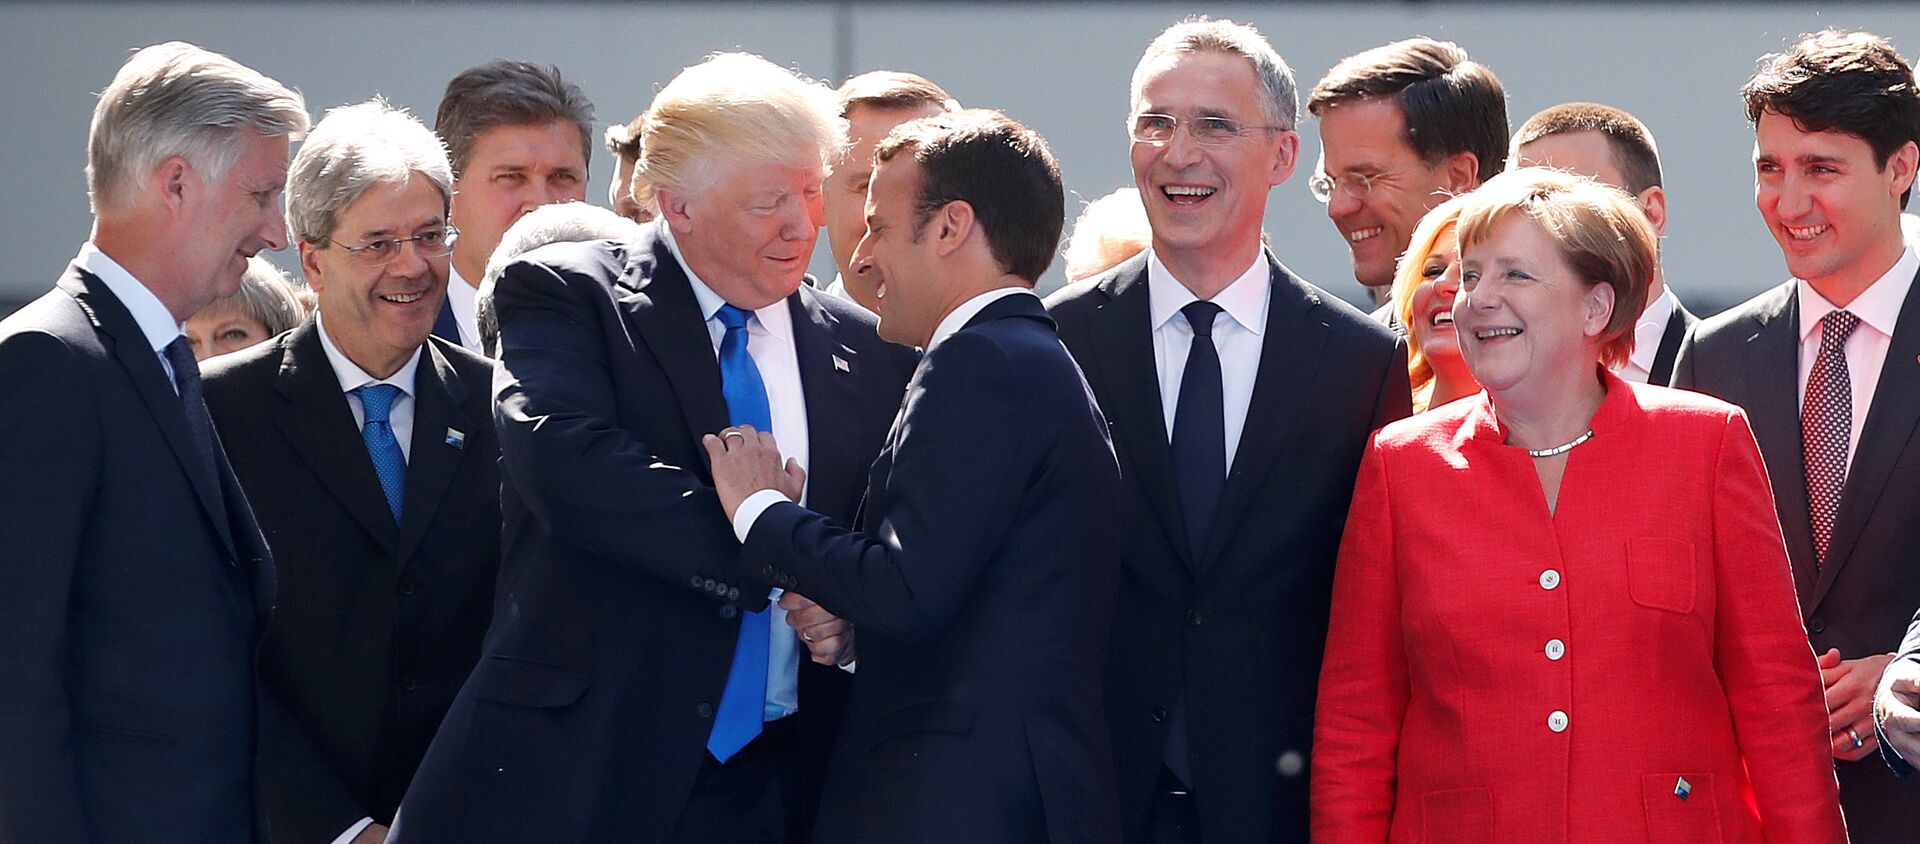 From L-R, Belgium's King Philipe, Italian Prime Minister Paolo Gentiloni, U.S. President Donald Trump who shakes hands with French President Emmanuel Macron, NATO Secretary General Jens Stoltenberg, Dutch Prime Minster Mark Rutte, German Chancellor Angela Merkel, and Canada's Prime Minister Justin Trudeau gather with NATO member leaders to pose for a family picture before the start of their summit in Brussels, Belgium, May 25, 2017 - Sputnik Afrique, 1920, 29.11.2019